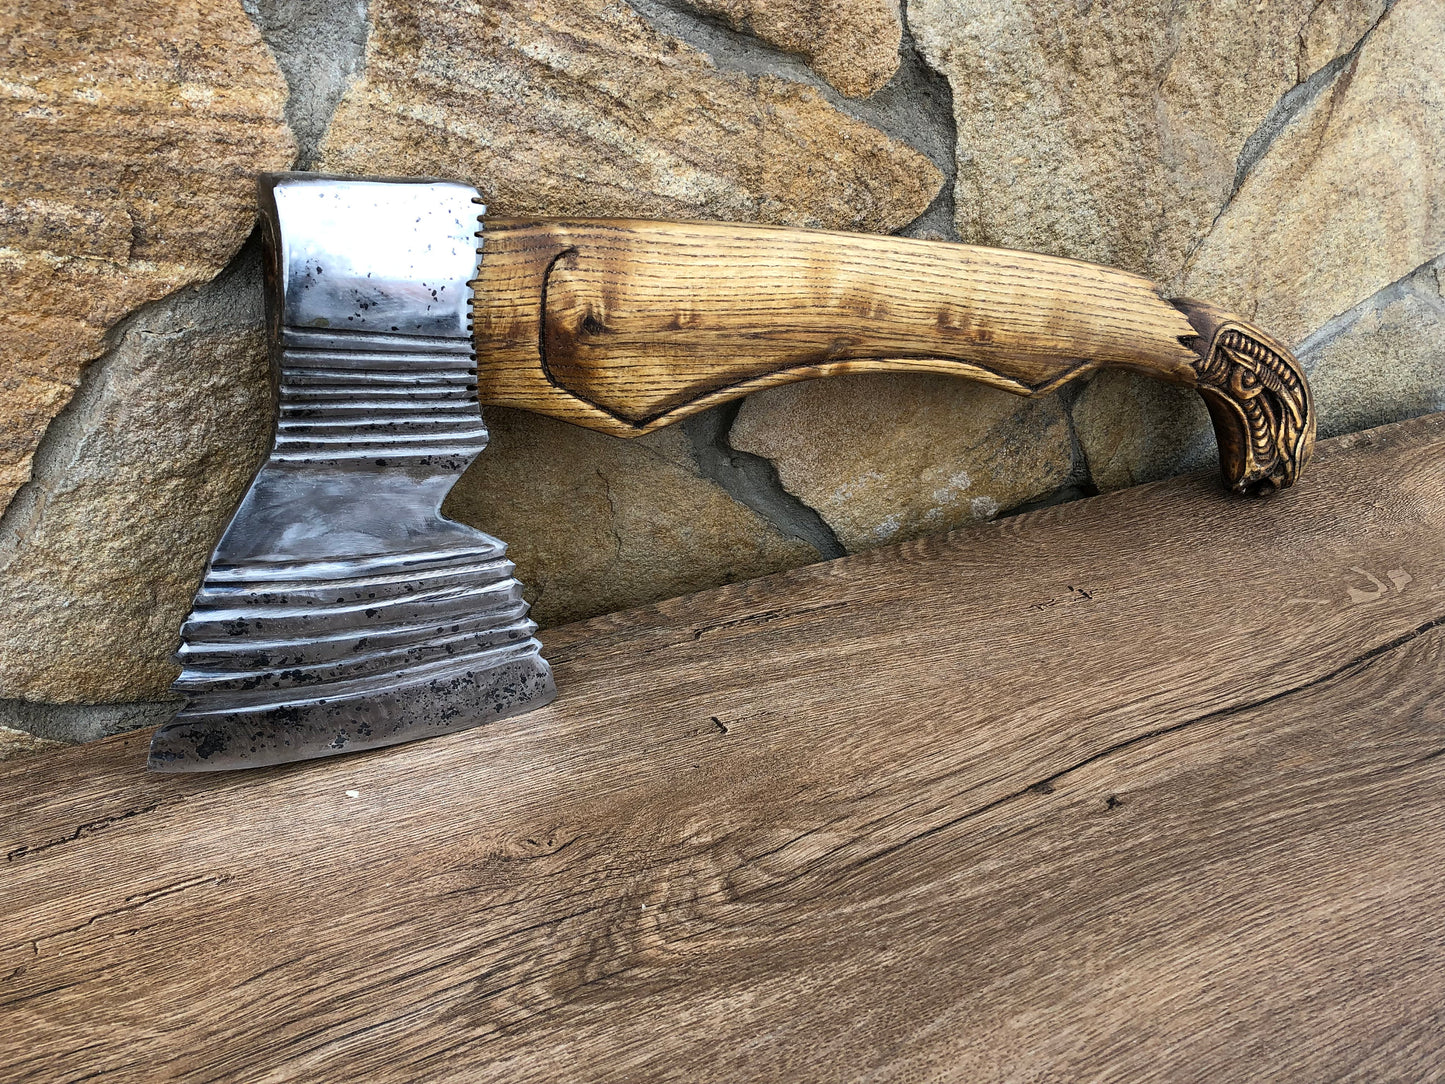 Manly gift, birthday gift, viking axe, anniversary gift, alien, Leviathan axe, handyman gift, Kratos, mens gifts, mens underwear, axes, tool